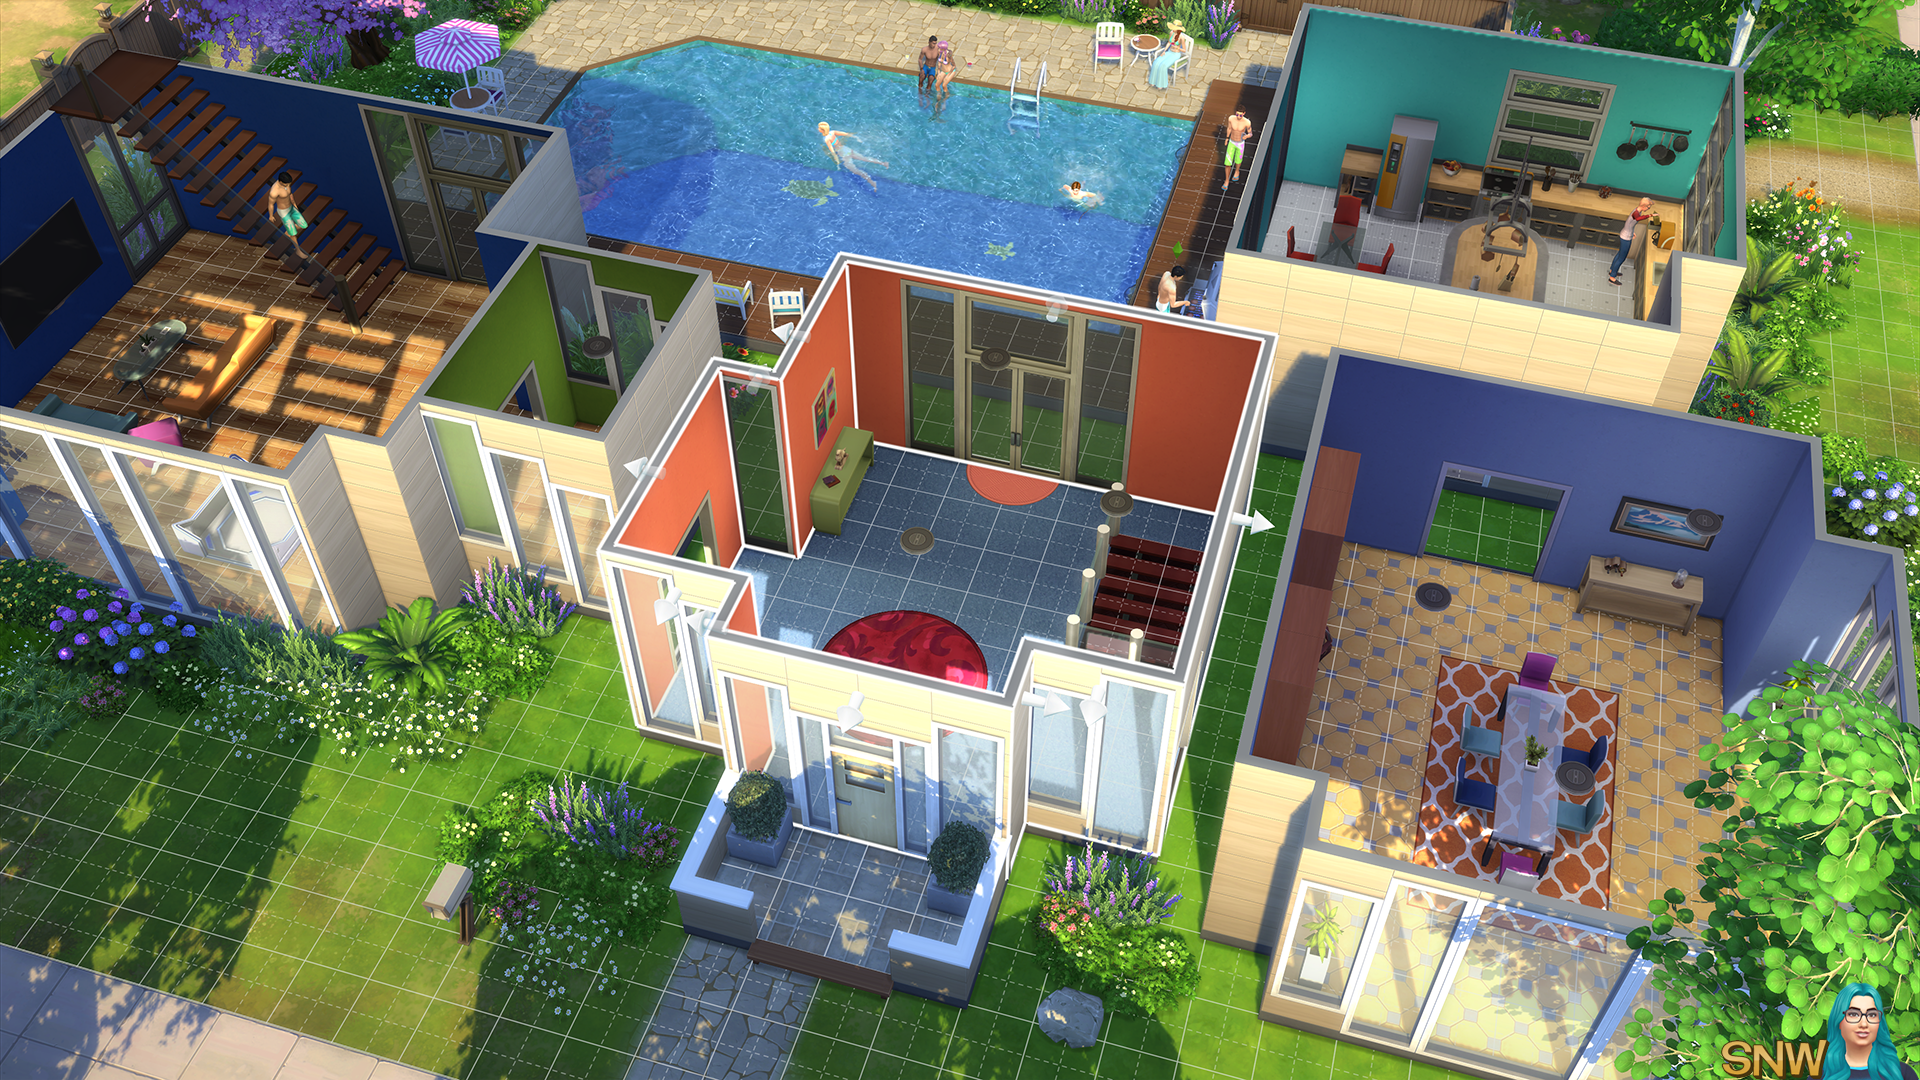 The Sims 4 on consoles (PS4/Xbox One) screenshots | SNW Games